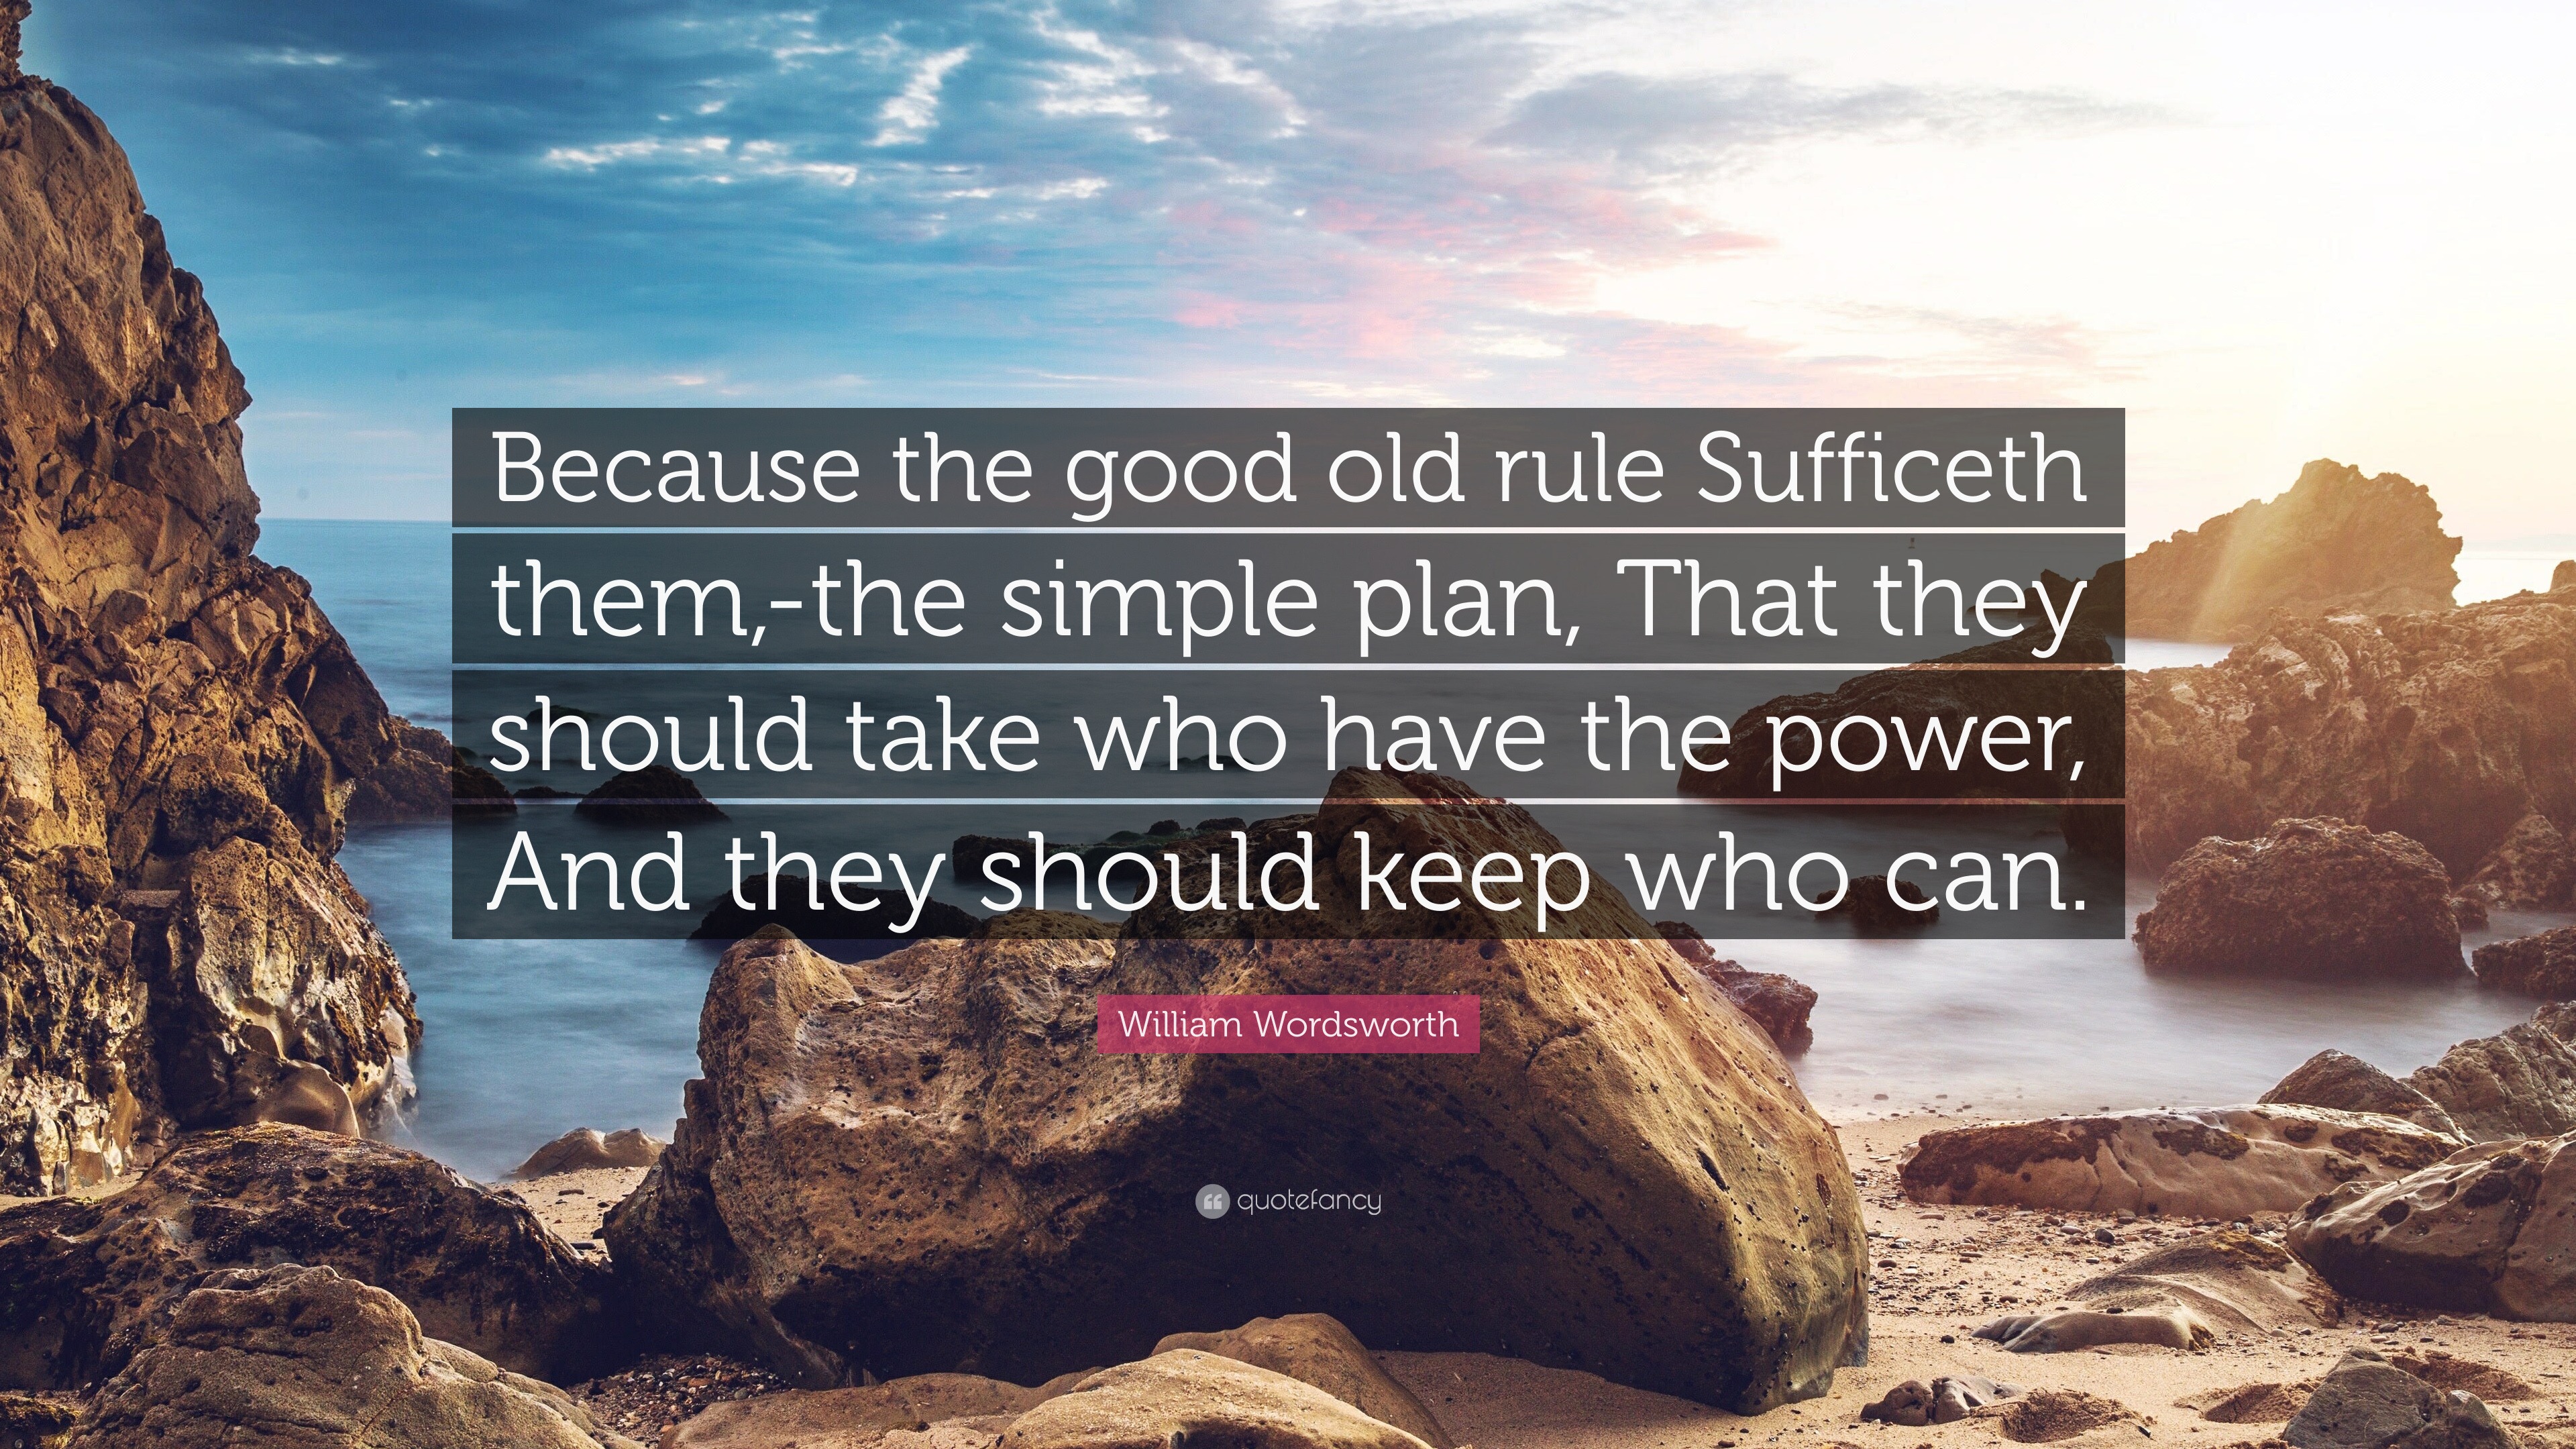 William Wordsworth Quote: “Because the good old rule Sufficeth them,-the simple  plan, That they should take who have the power, And they should kee...”